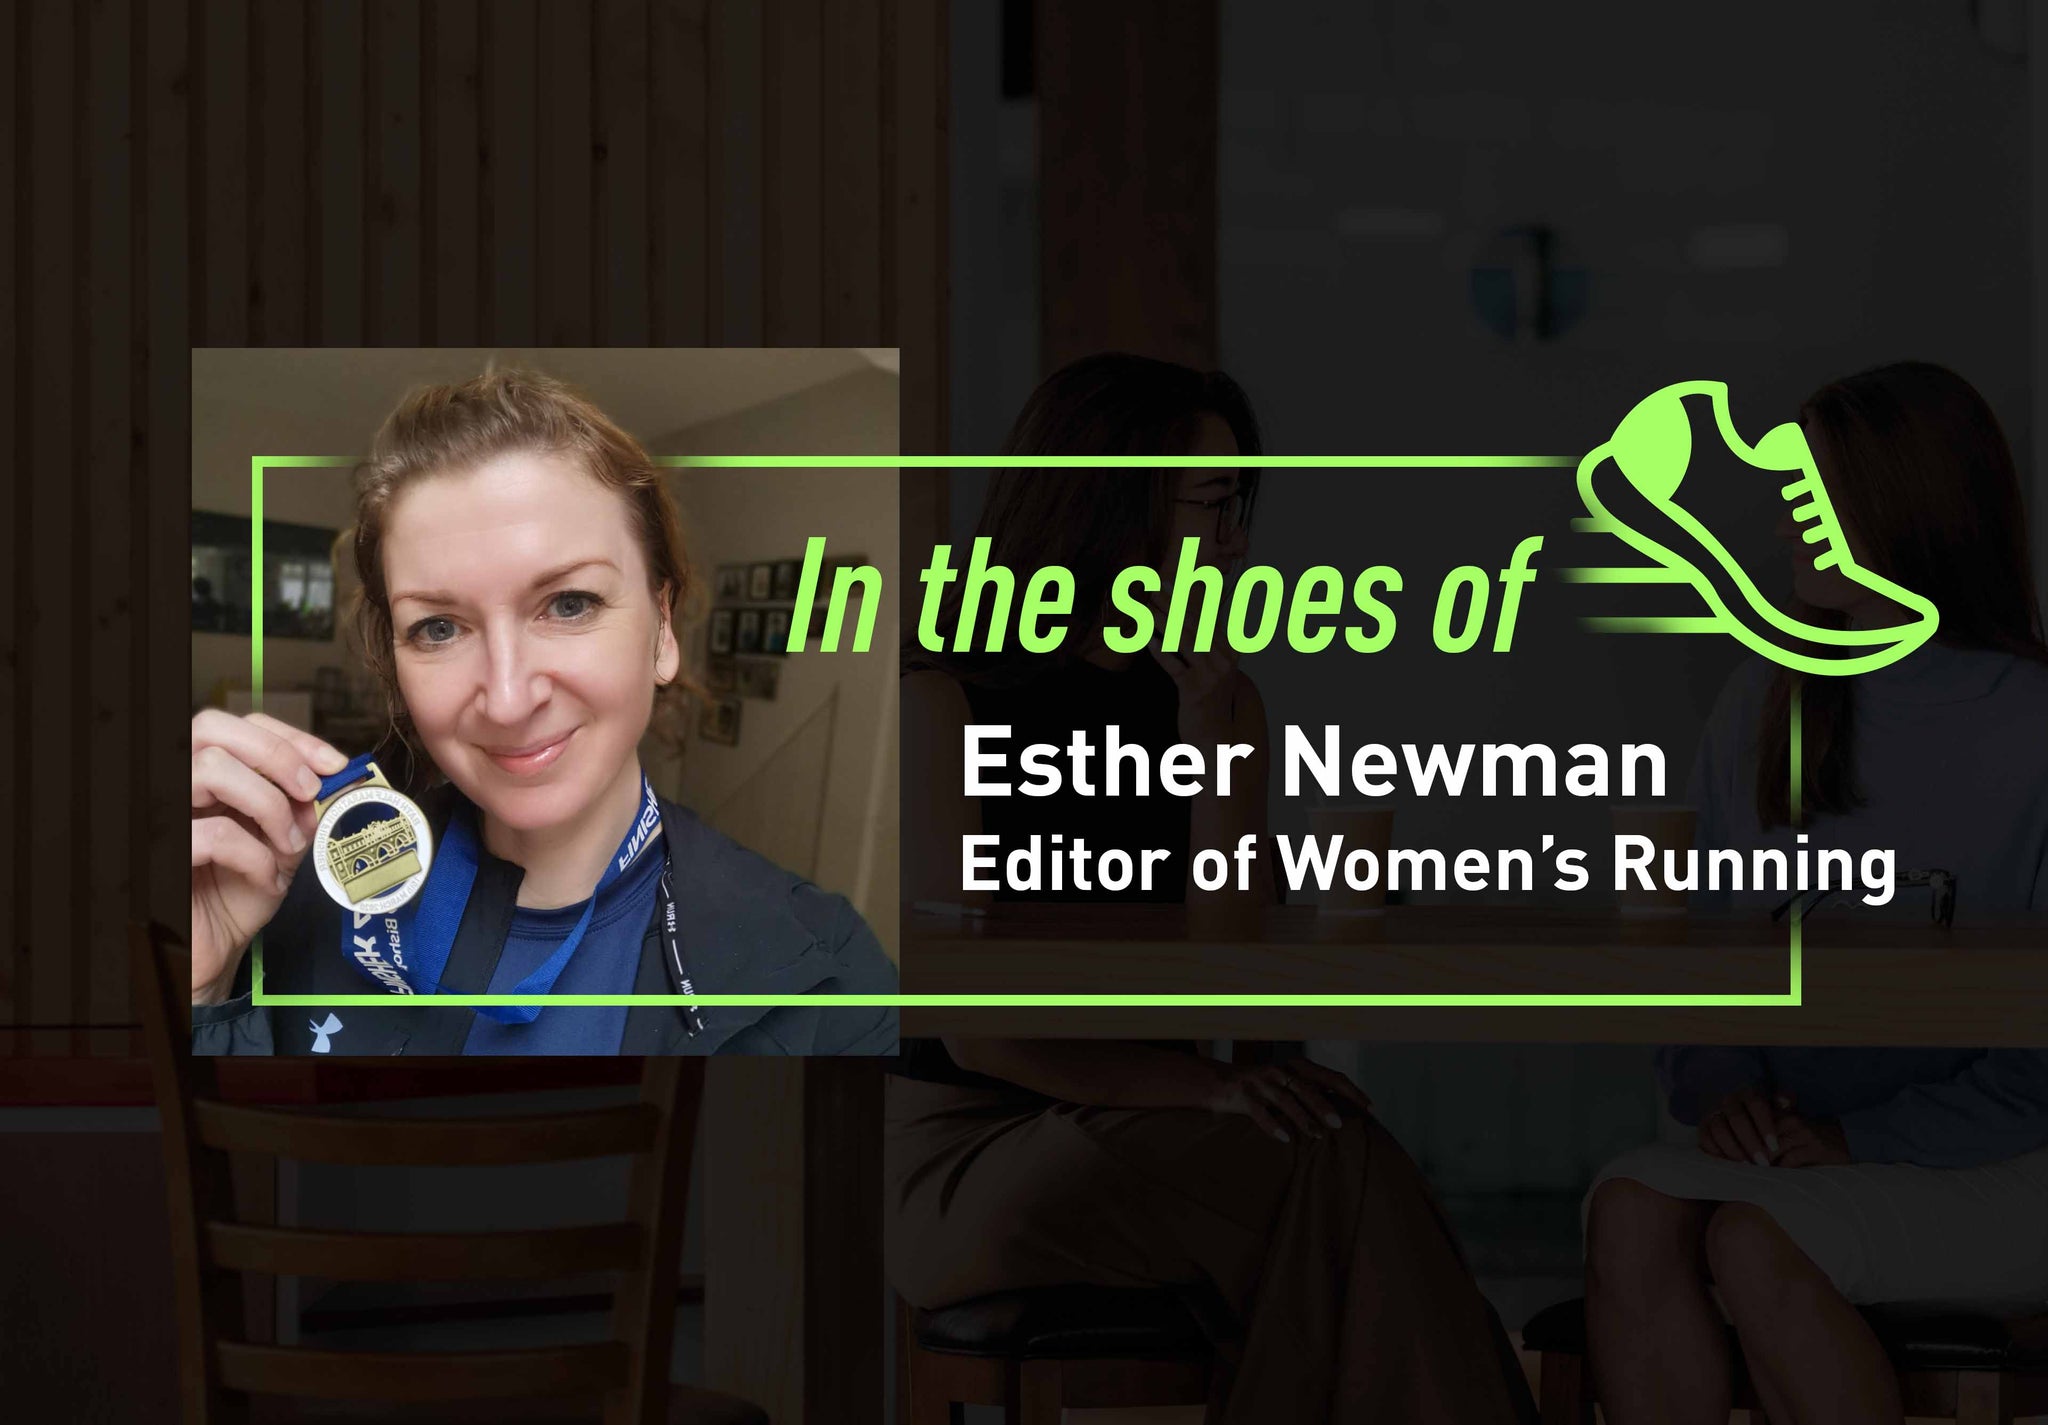 In the shoes of Esther Newman, Editor of Women’s Running